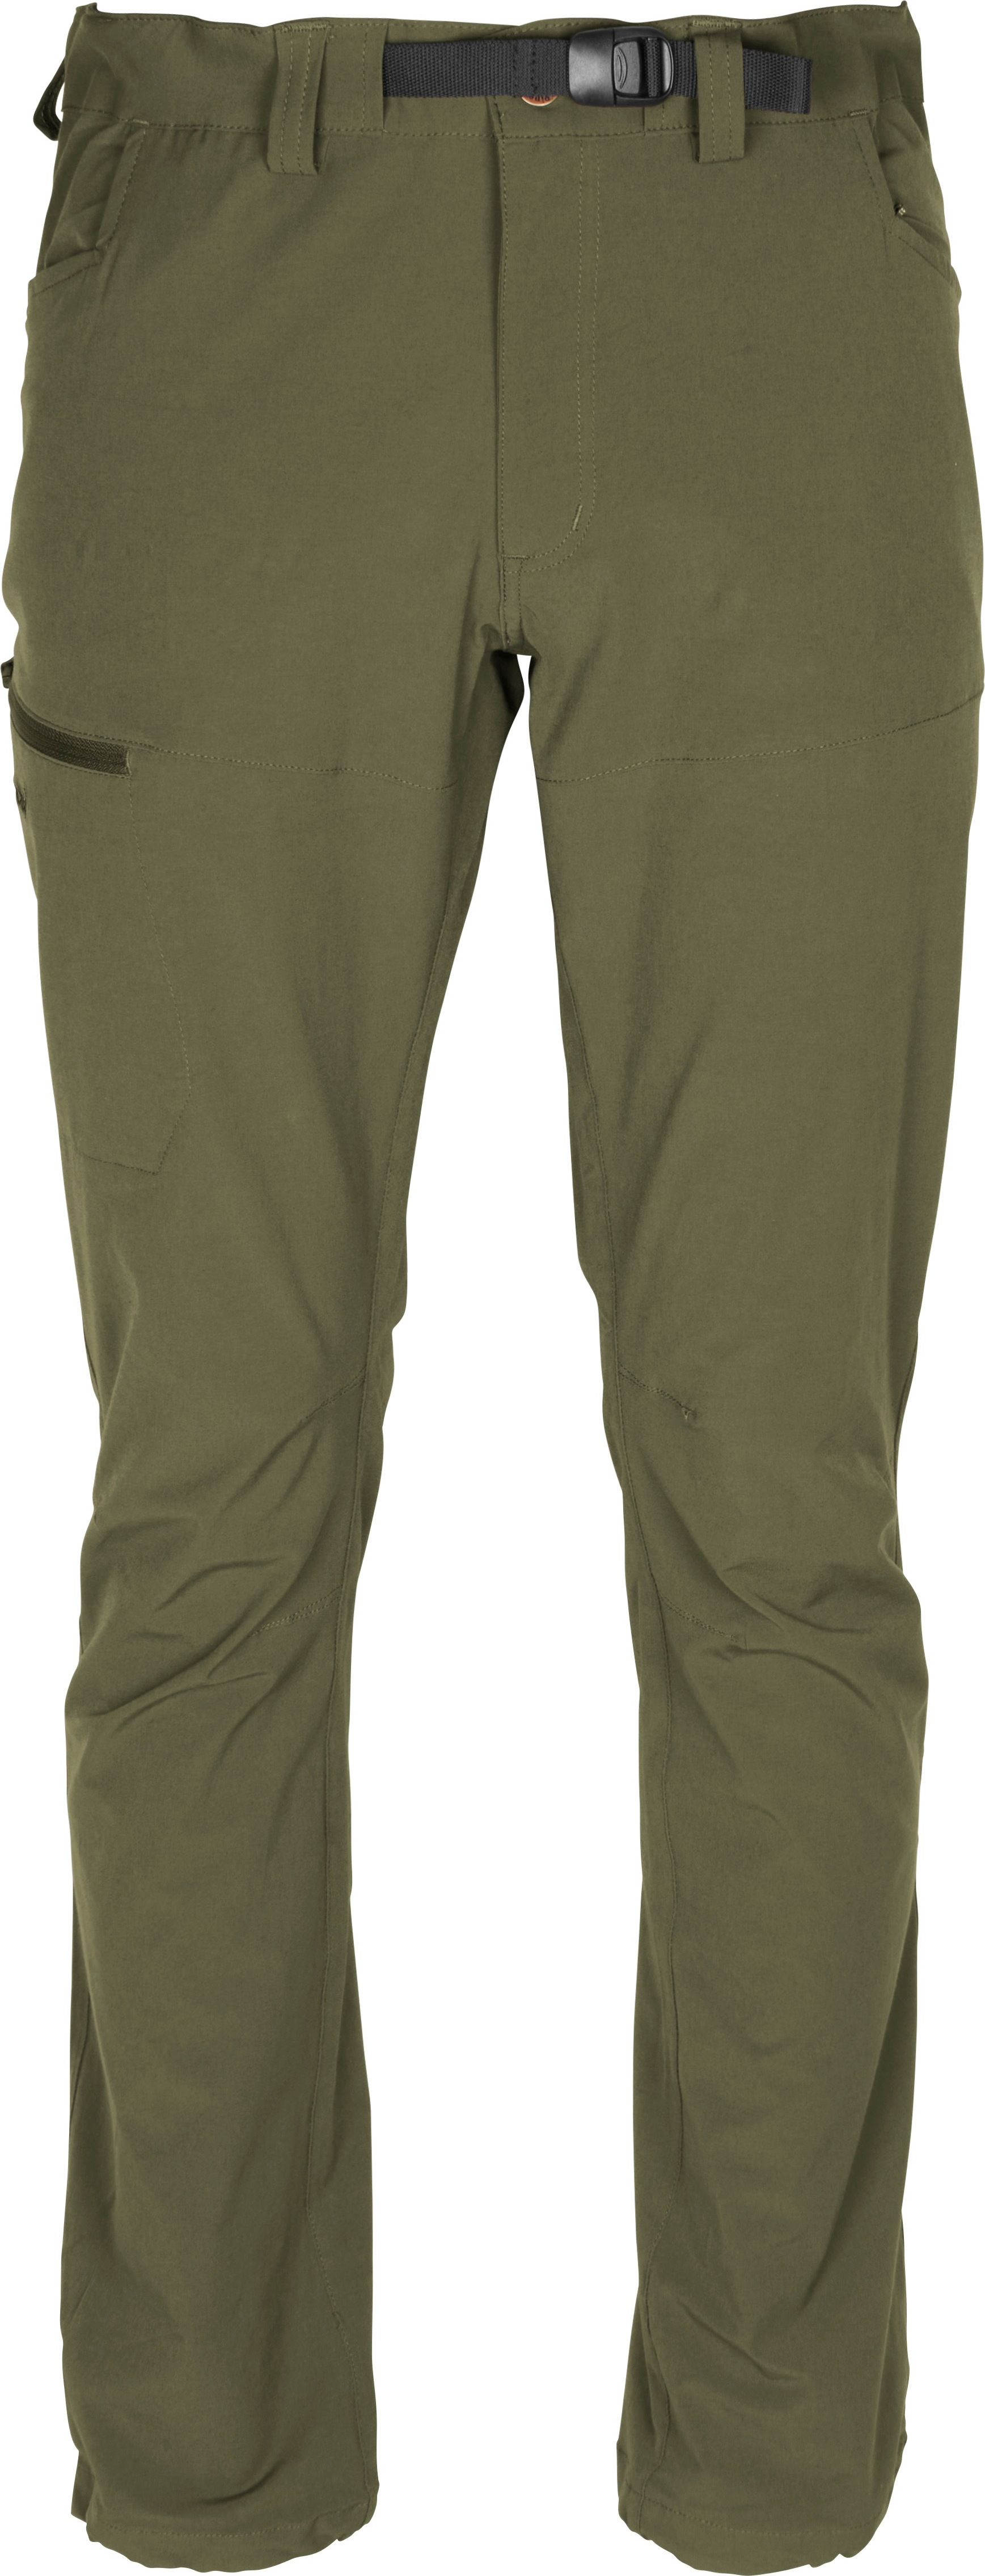 Pinewood Men’s Everyday Travel Trousers Green